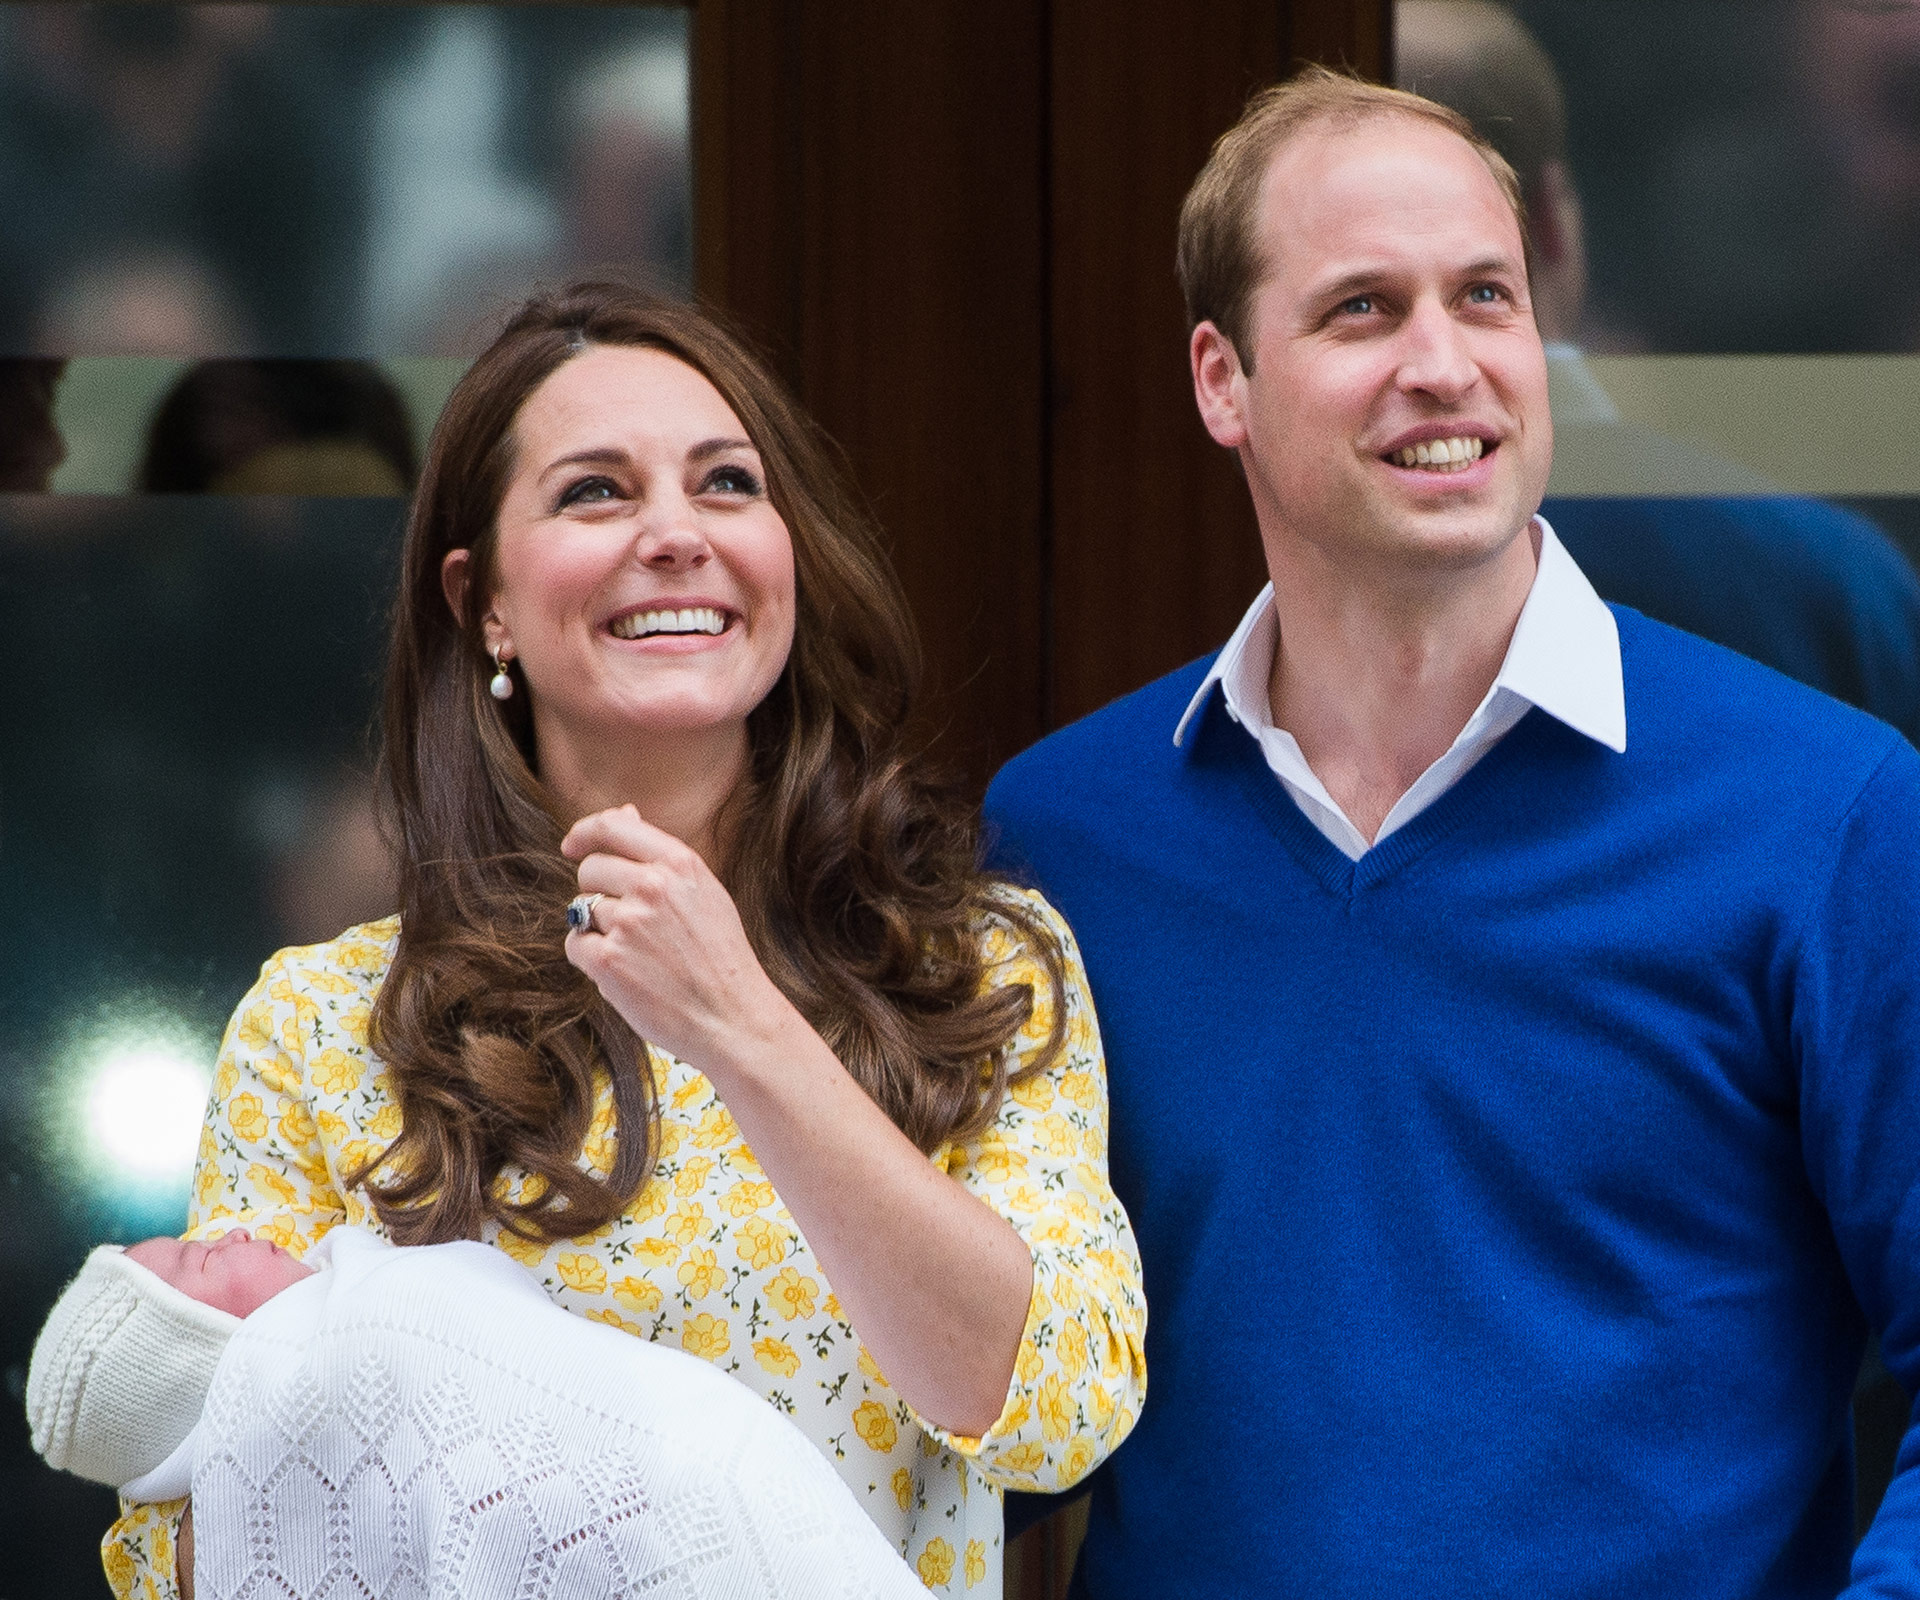 The world celebrates the arrival of the new Princess of Cambridge